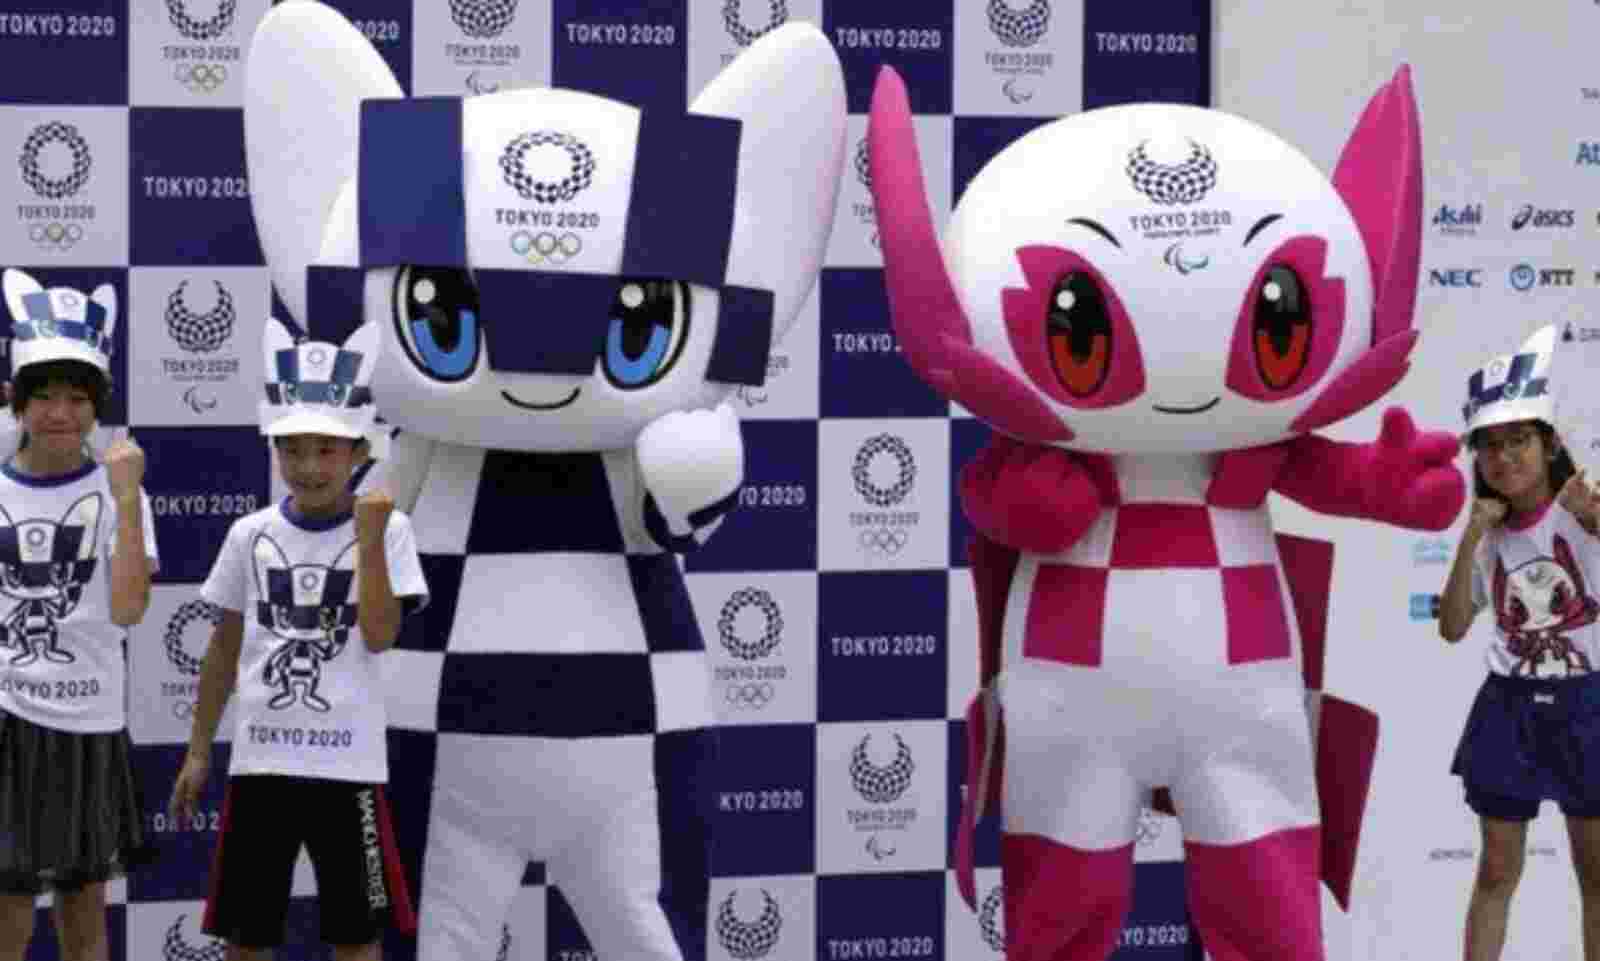 All You Need To Know About The Tokyo Olympics 2020 Mascots